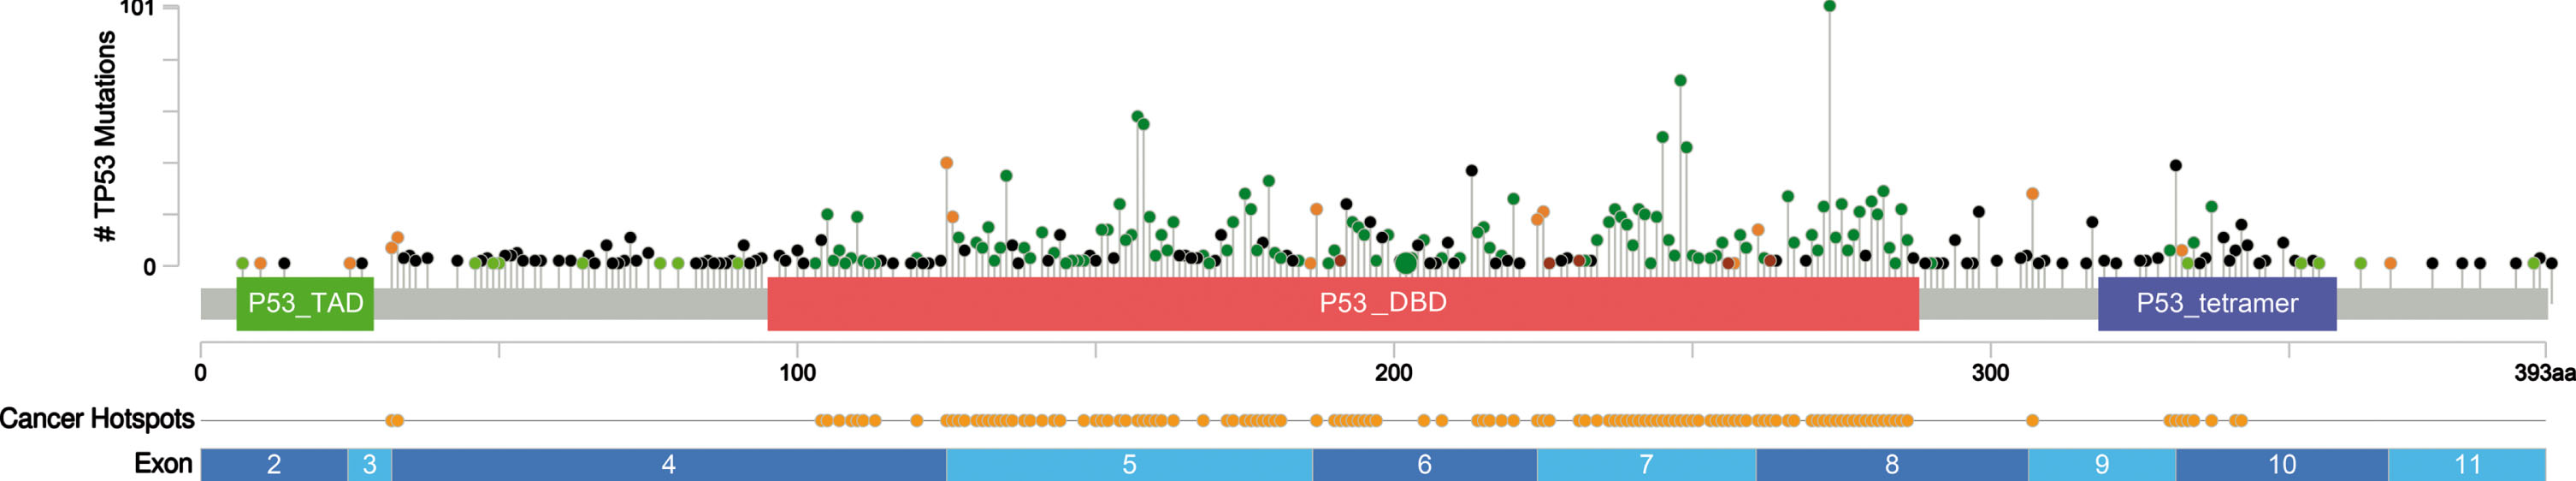 The scheme of the p53 protein sequence, functional domains, and exons of the TP53 gene, with the locations of amino acids changes introduced by pathogenic missense (green pin), in-frame (brown pin), splice (orange pin), and nonsense single nucleotide variants, SNVs (black pin), commonly detected in lung adenocarcinoma (6294 samples from 5844 patients in 13 studies, cBioPortal v. 4.0.2 database [76, 77].